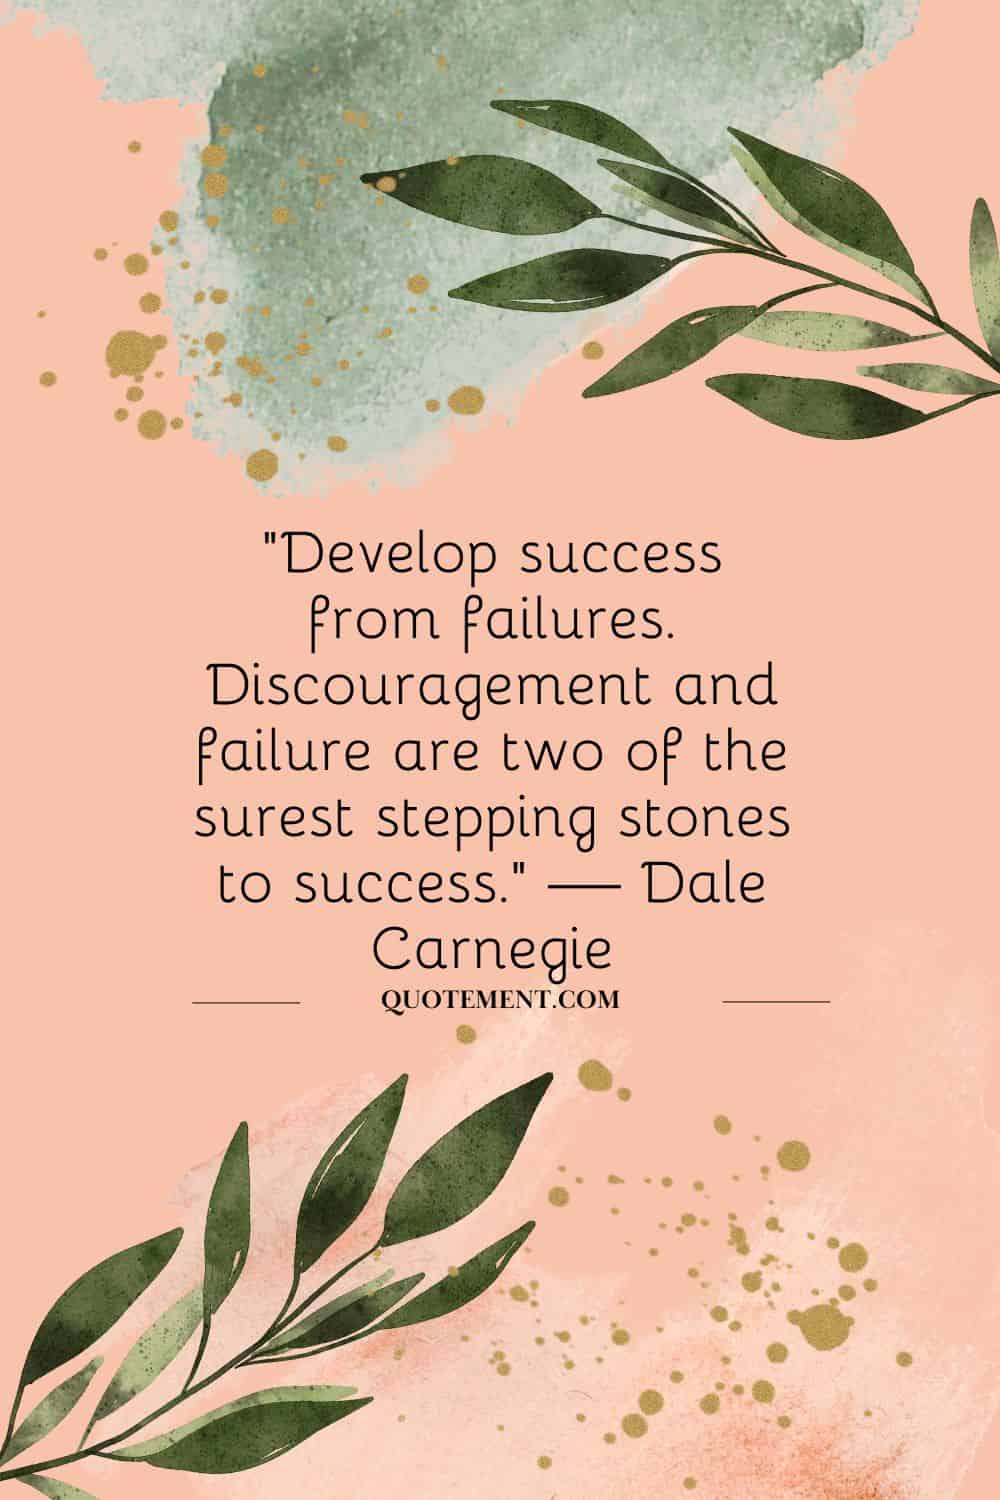 “Develop success from failures. Discouragement and failure are two of the surest stepping stones to success.” — Dale Carnegie